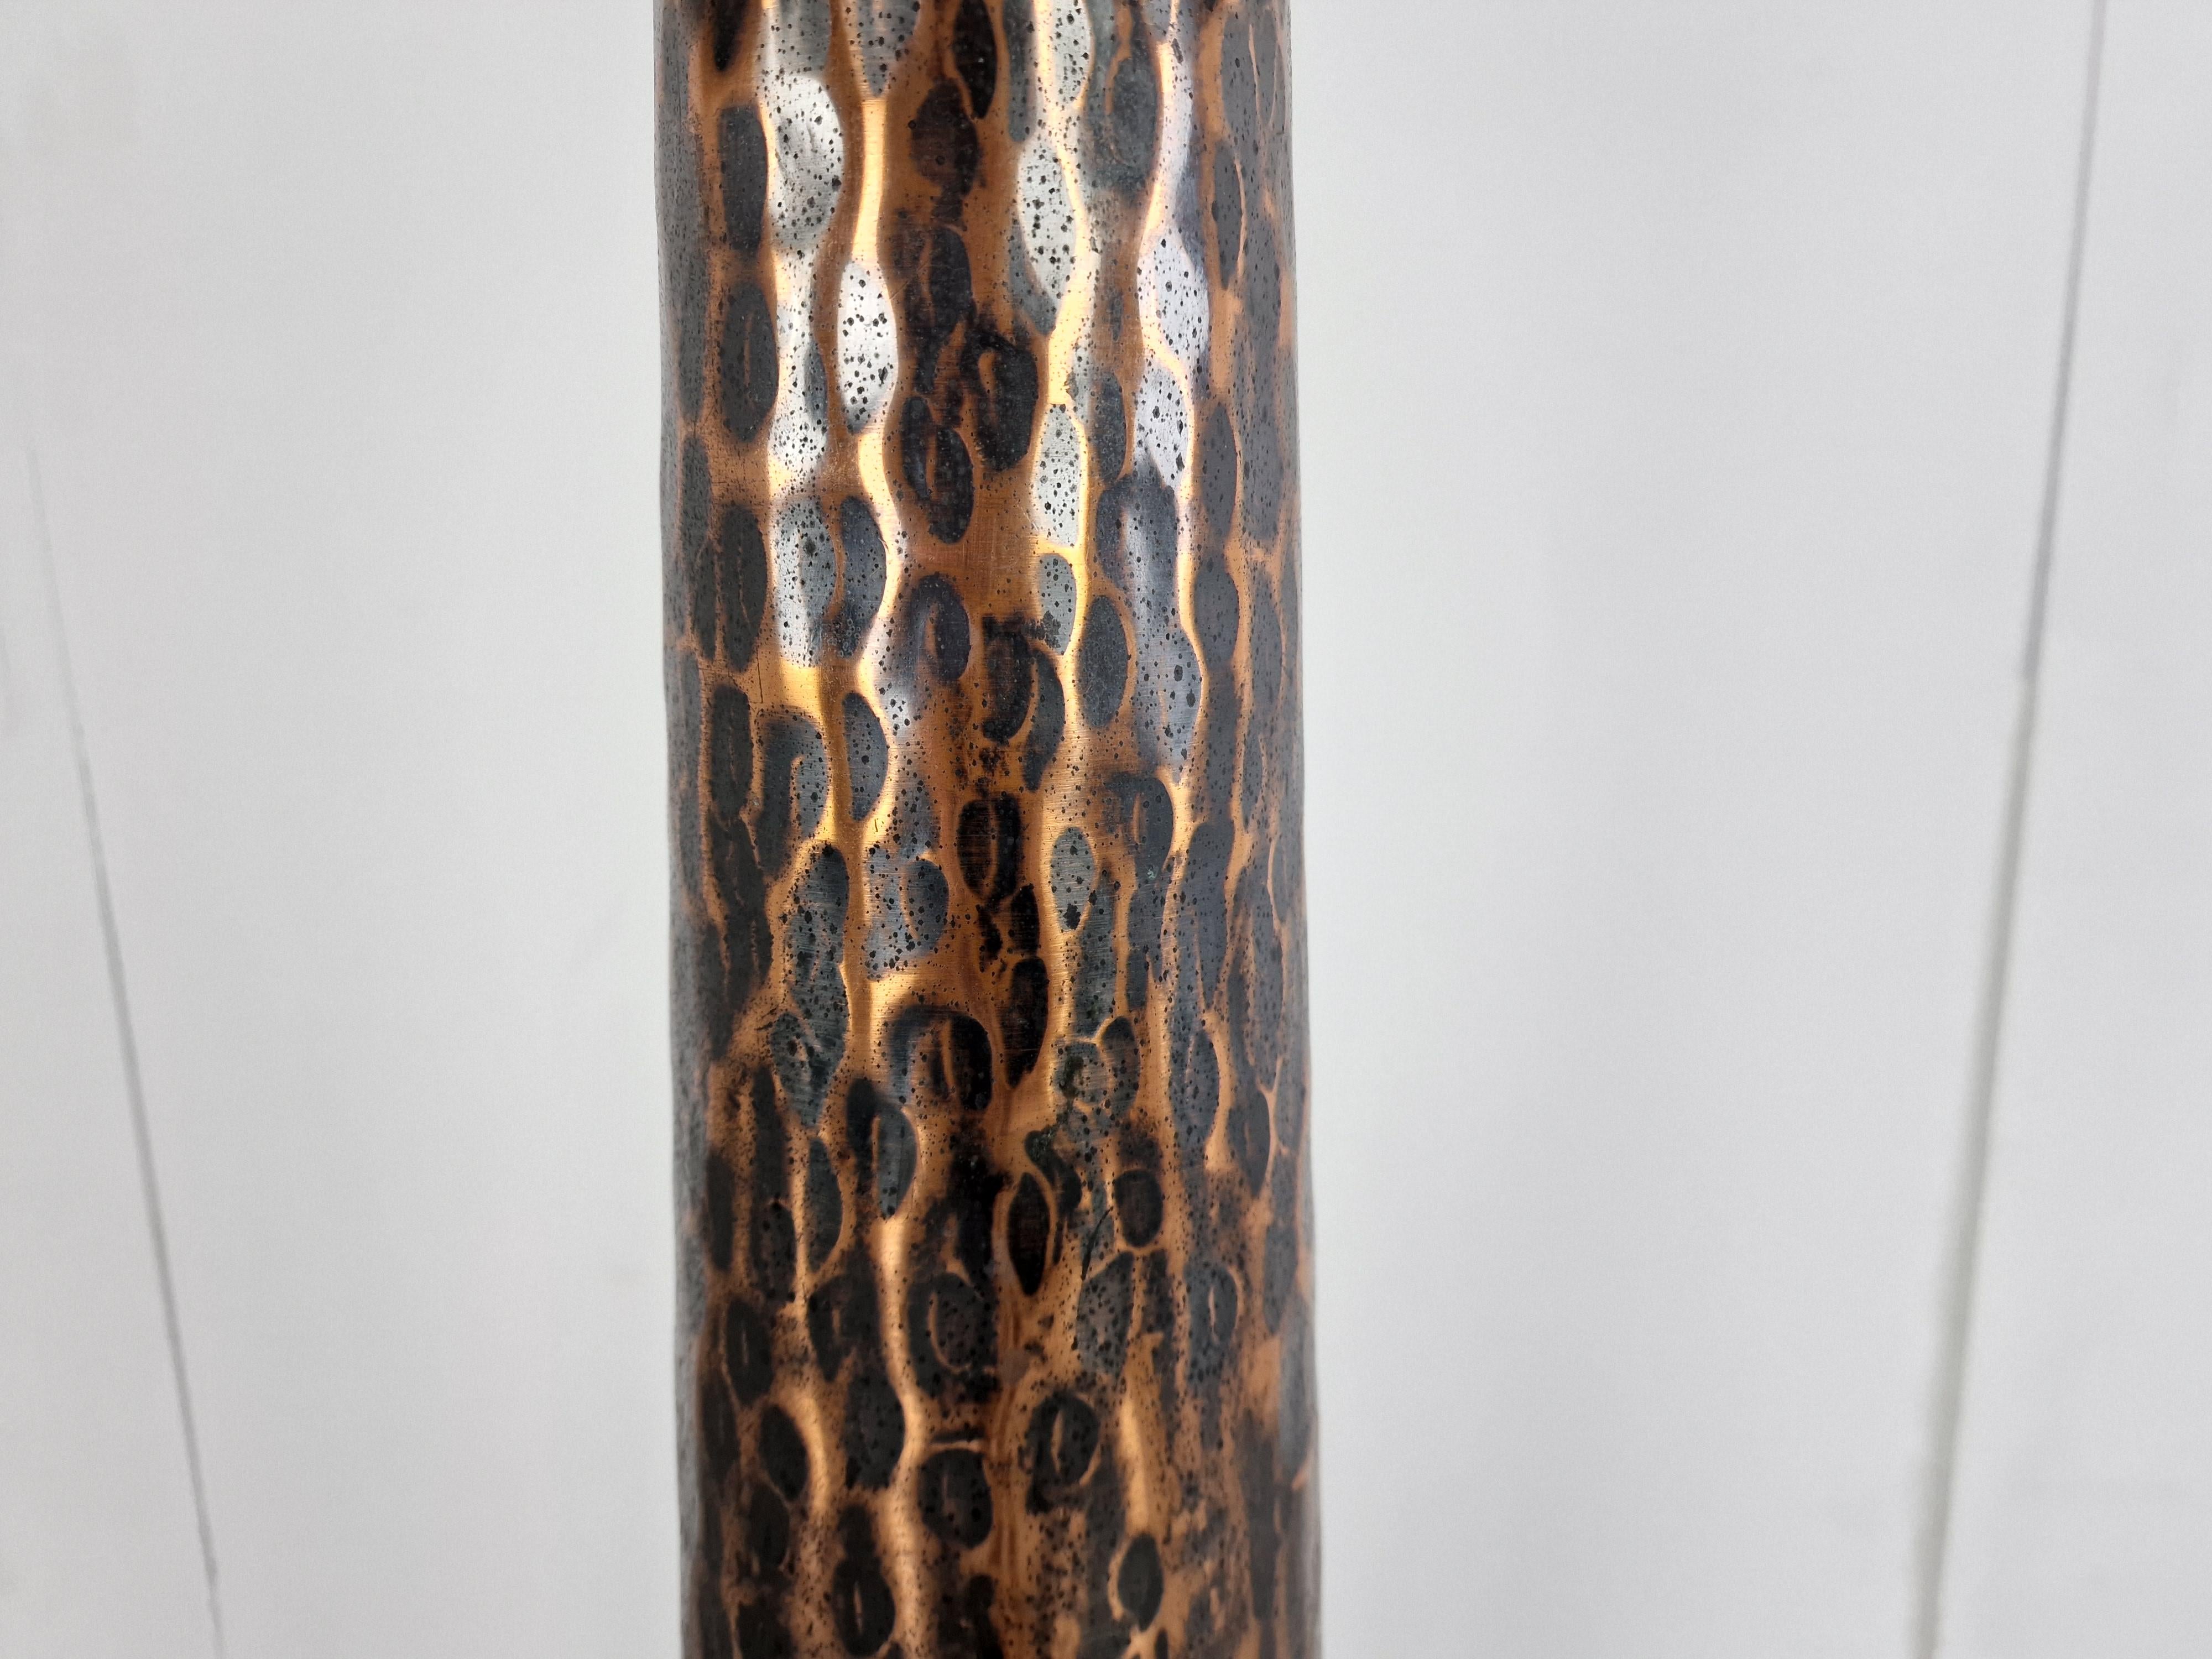 Beautiful hammered copper brutalist floor candle stand.

Cool 'brut' design.

Nice decorative piece.

1970s - Germany

Dimension:
Height: 137cm/53.93